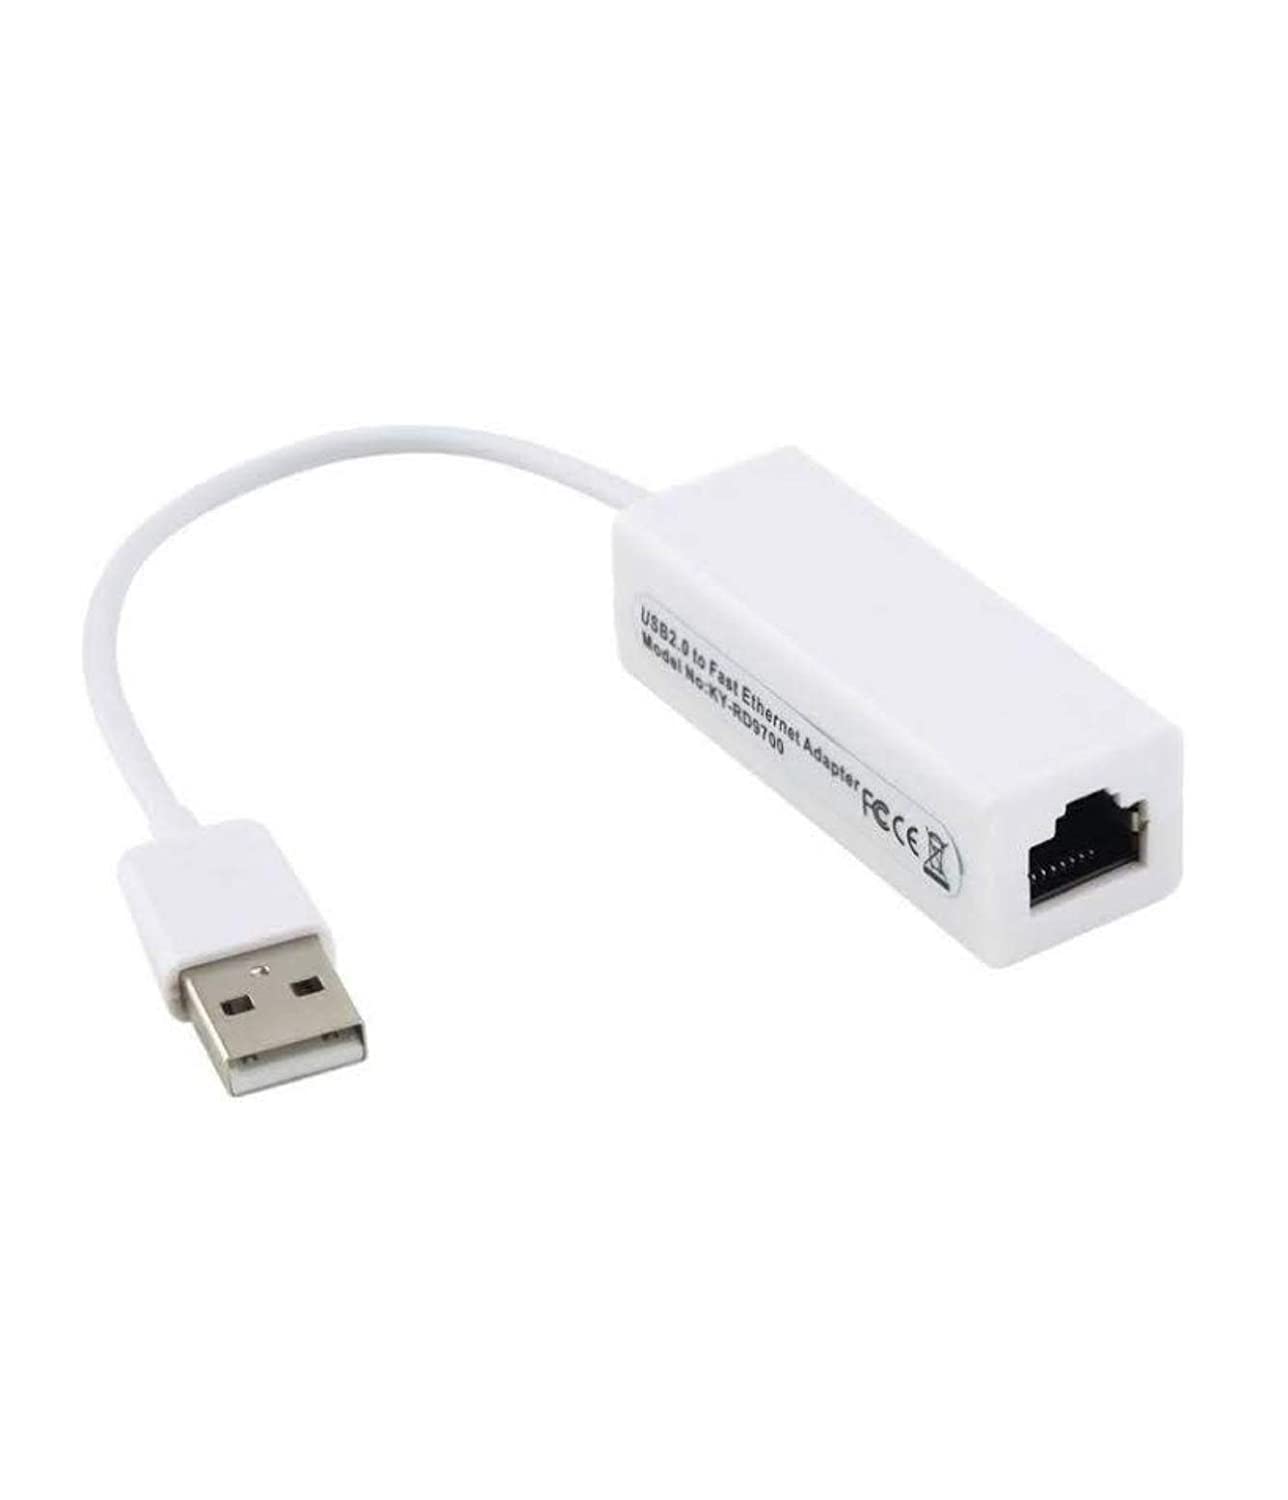 download rd9700 usb2.0 to fast ethernet adapter driver for mac air